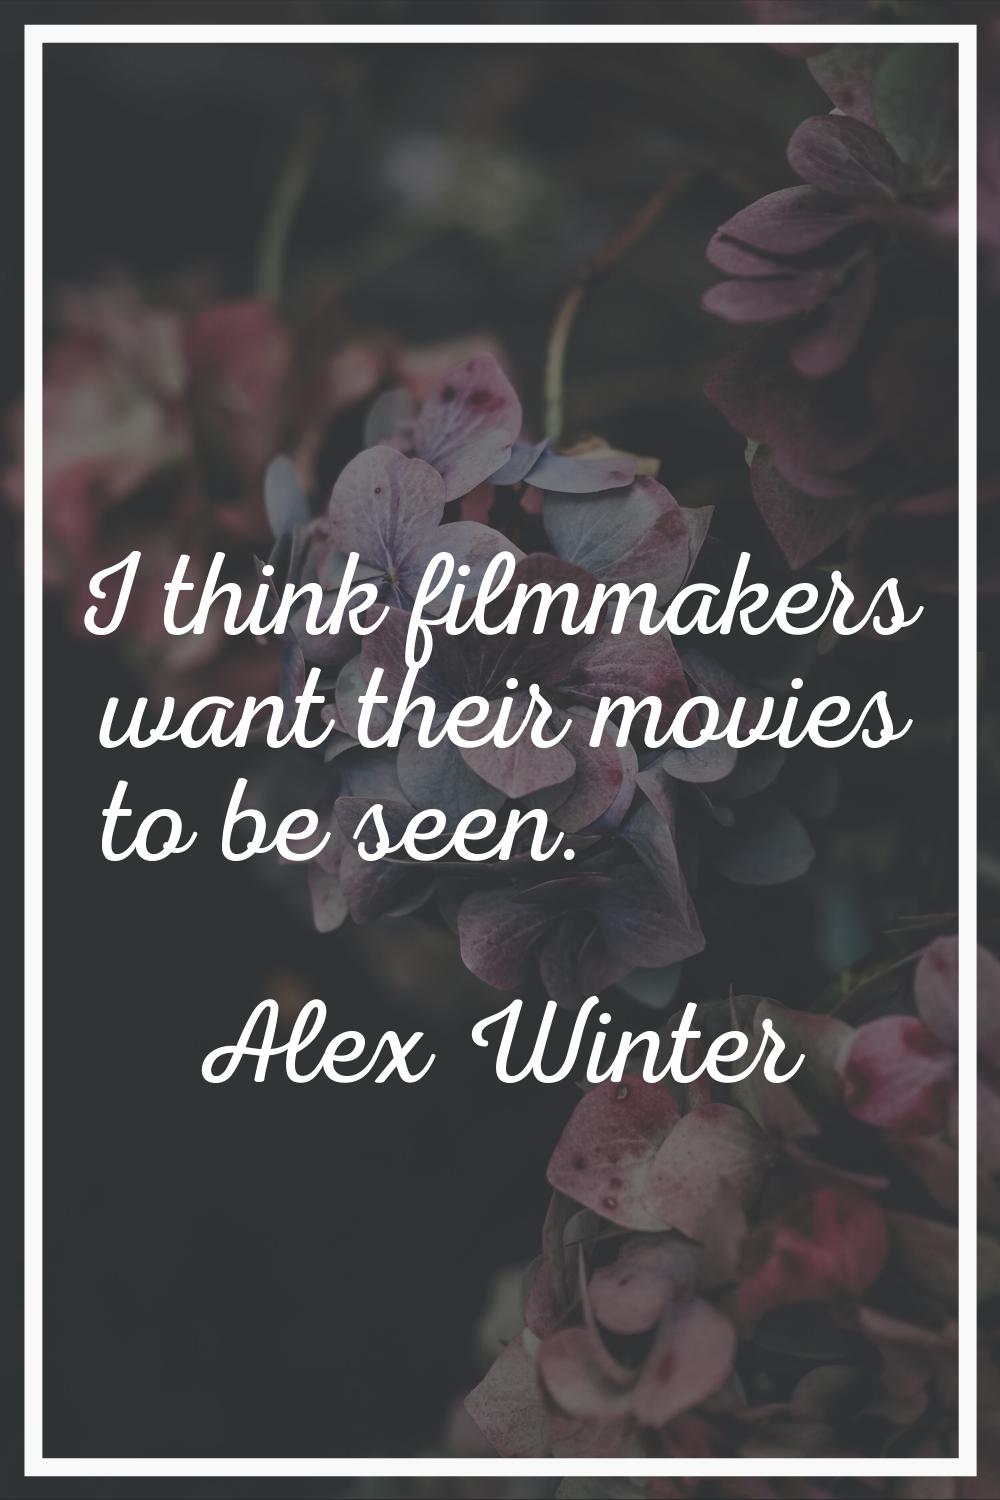 I think filmmakers want their movies to be seen.